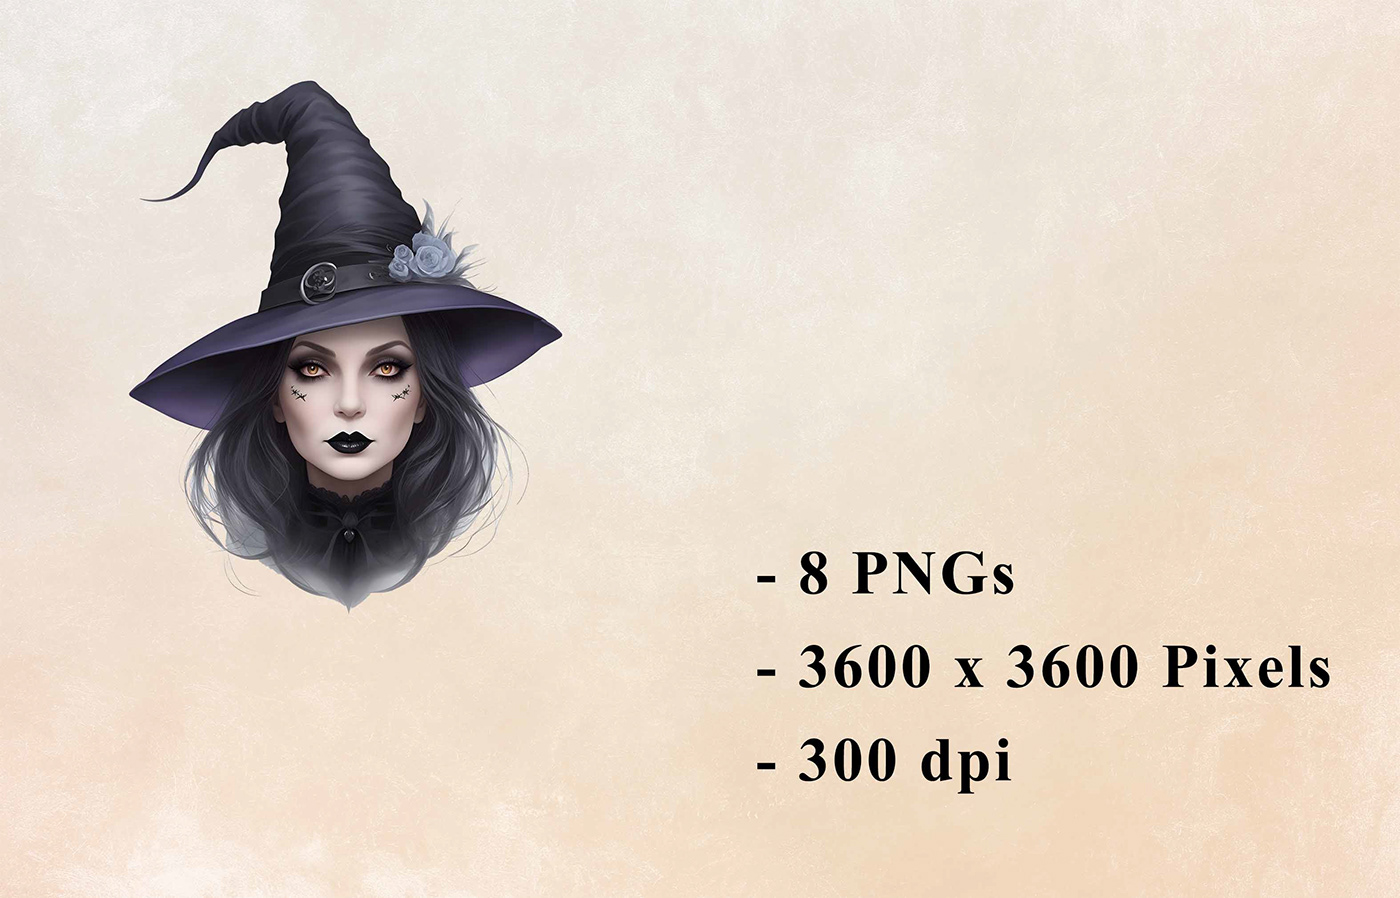 Halloween witch Magic   gothic witchcraft Witches watercolor free freebie clipart